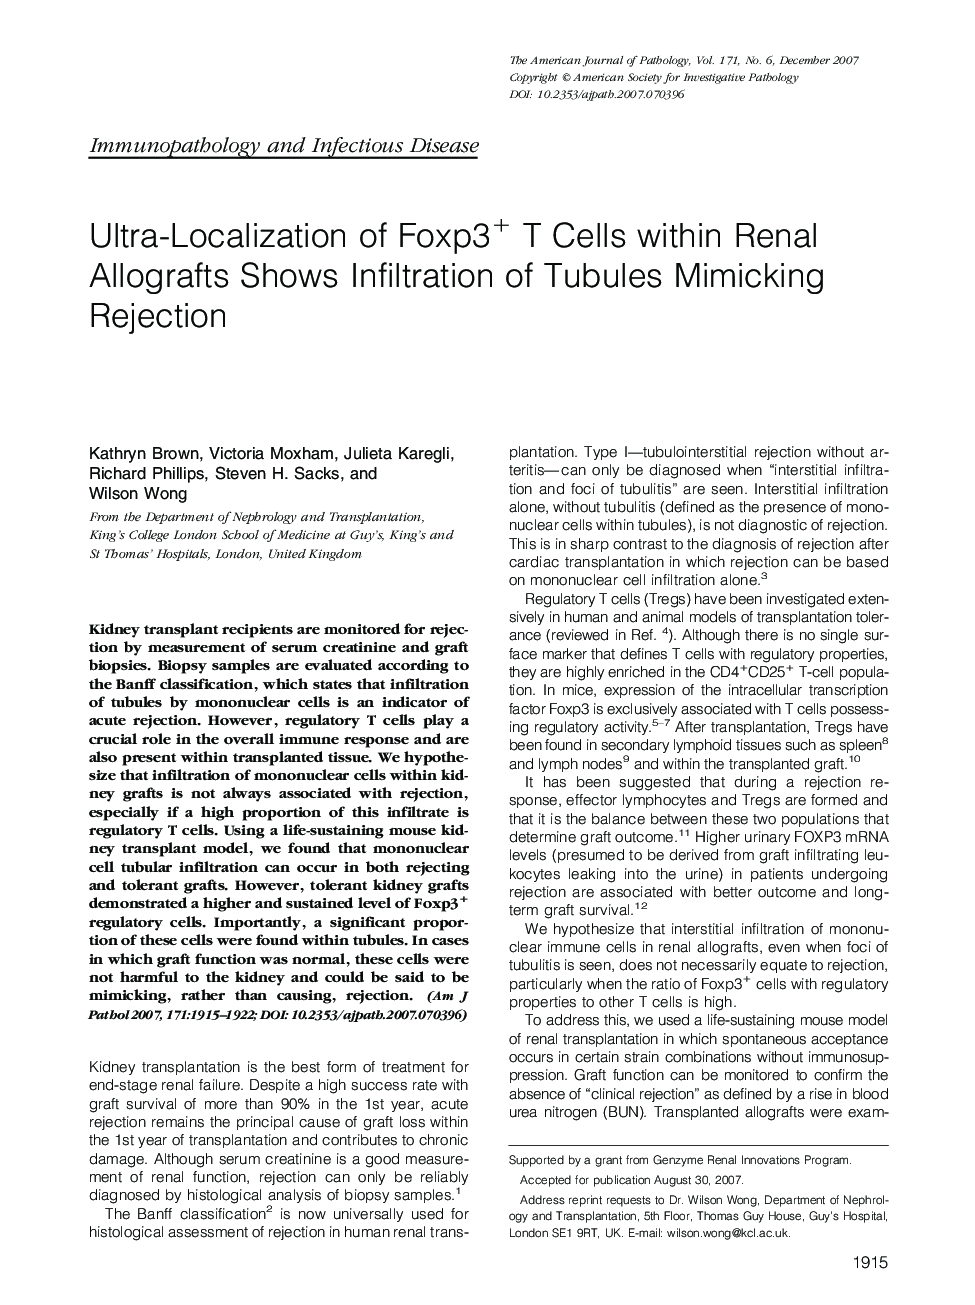 Ultra-Localization of Foxp3+ T Cells within Renal Allografts Shows Infiltration of Tubules Mimicking Rejection 